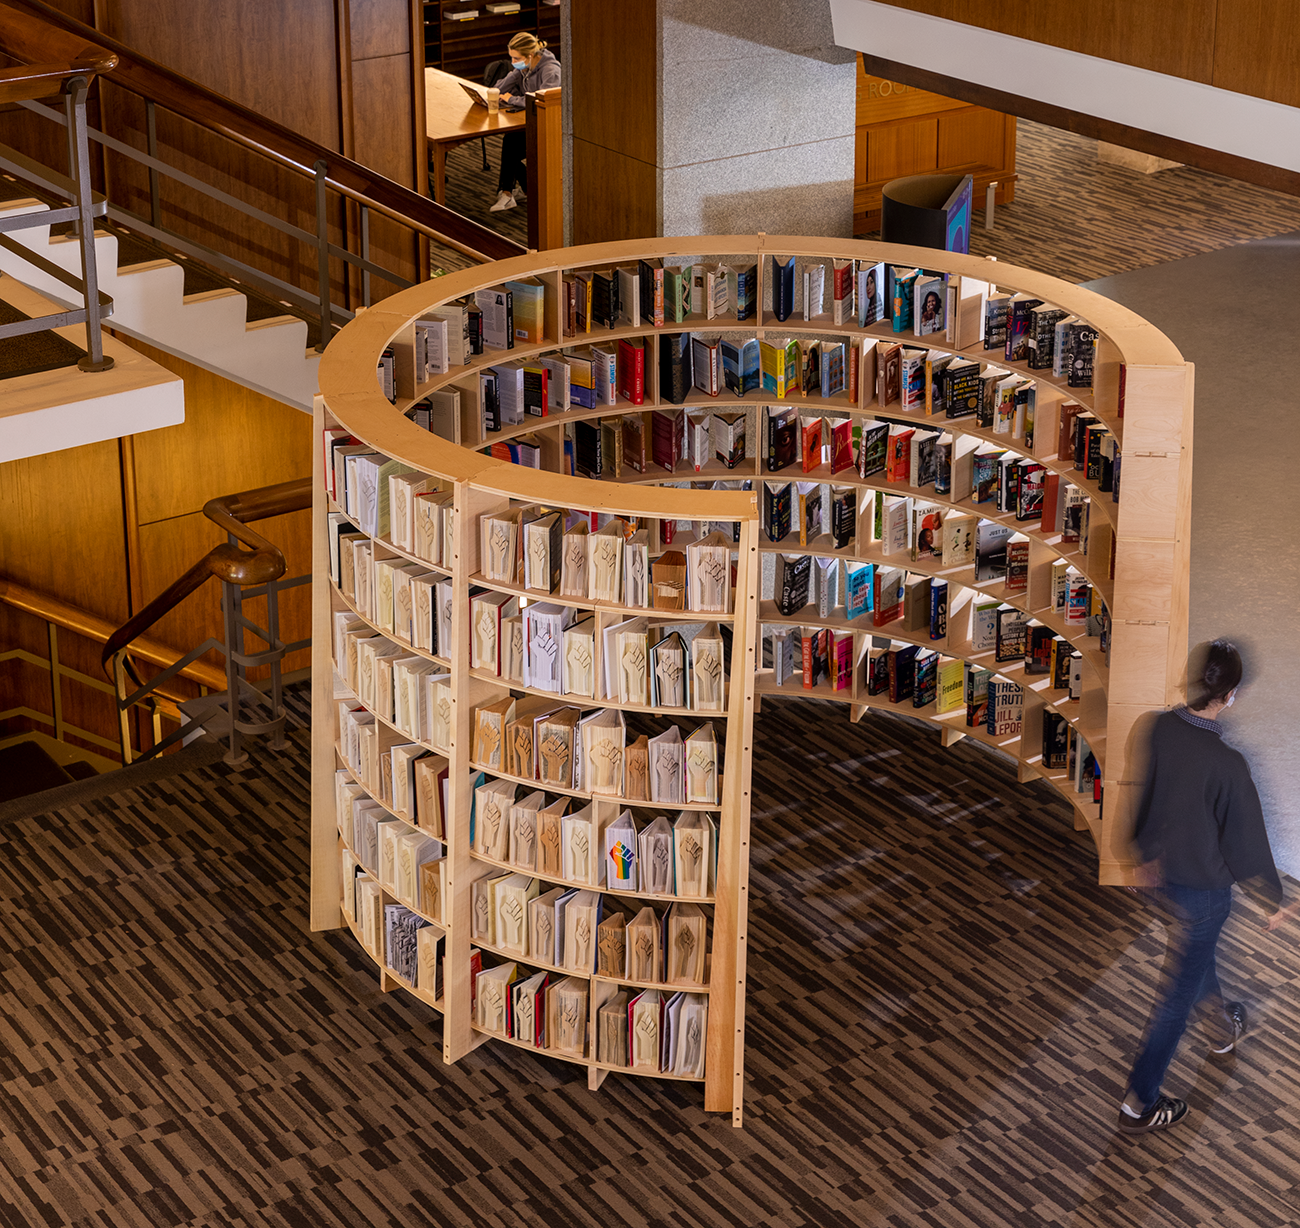 A circular bookcase filled with books in the Frost library